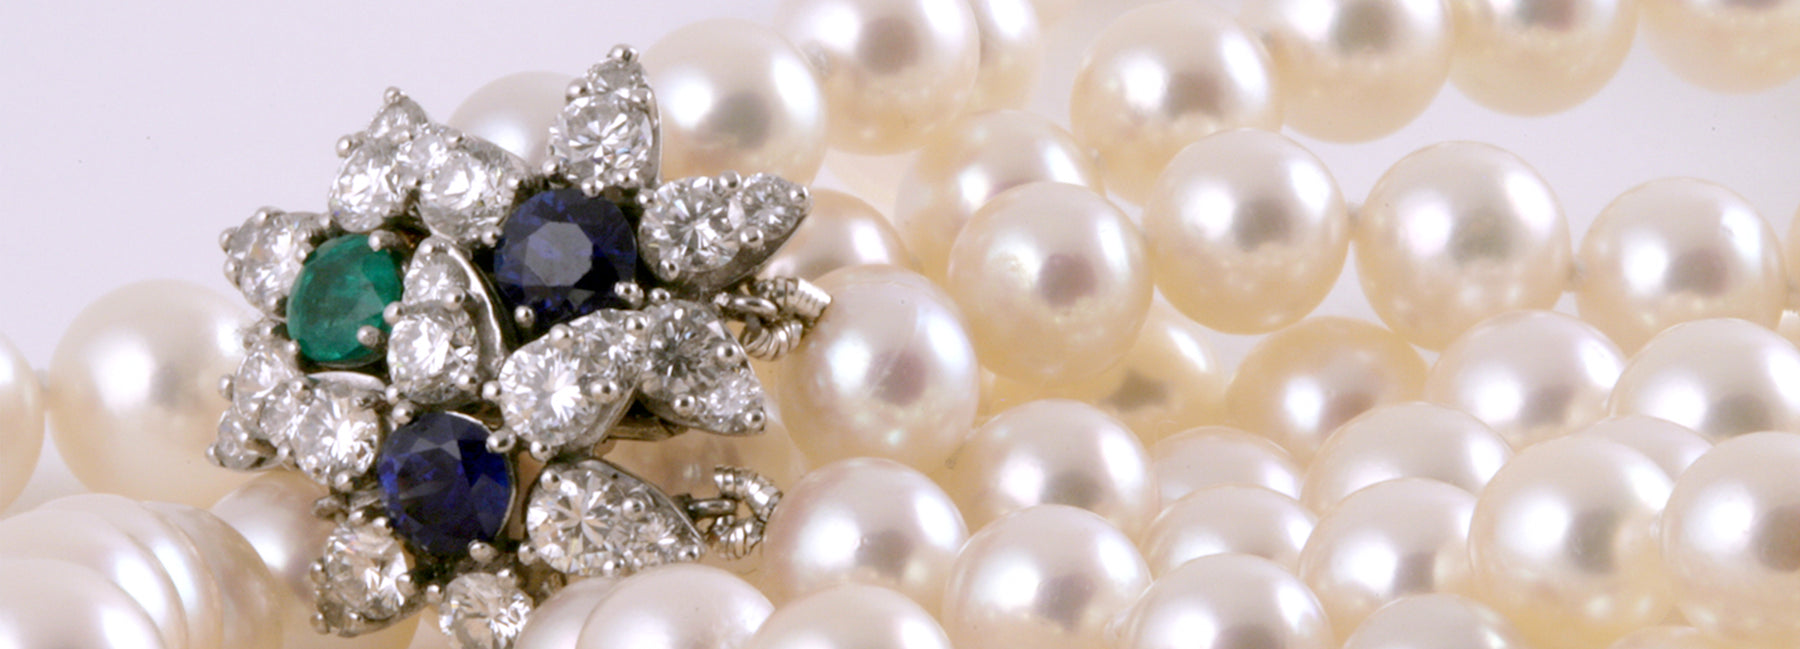 Macklowe Gallery's Definitive Guide To Pearls